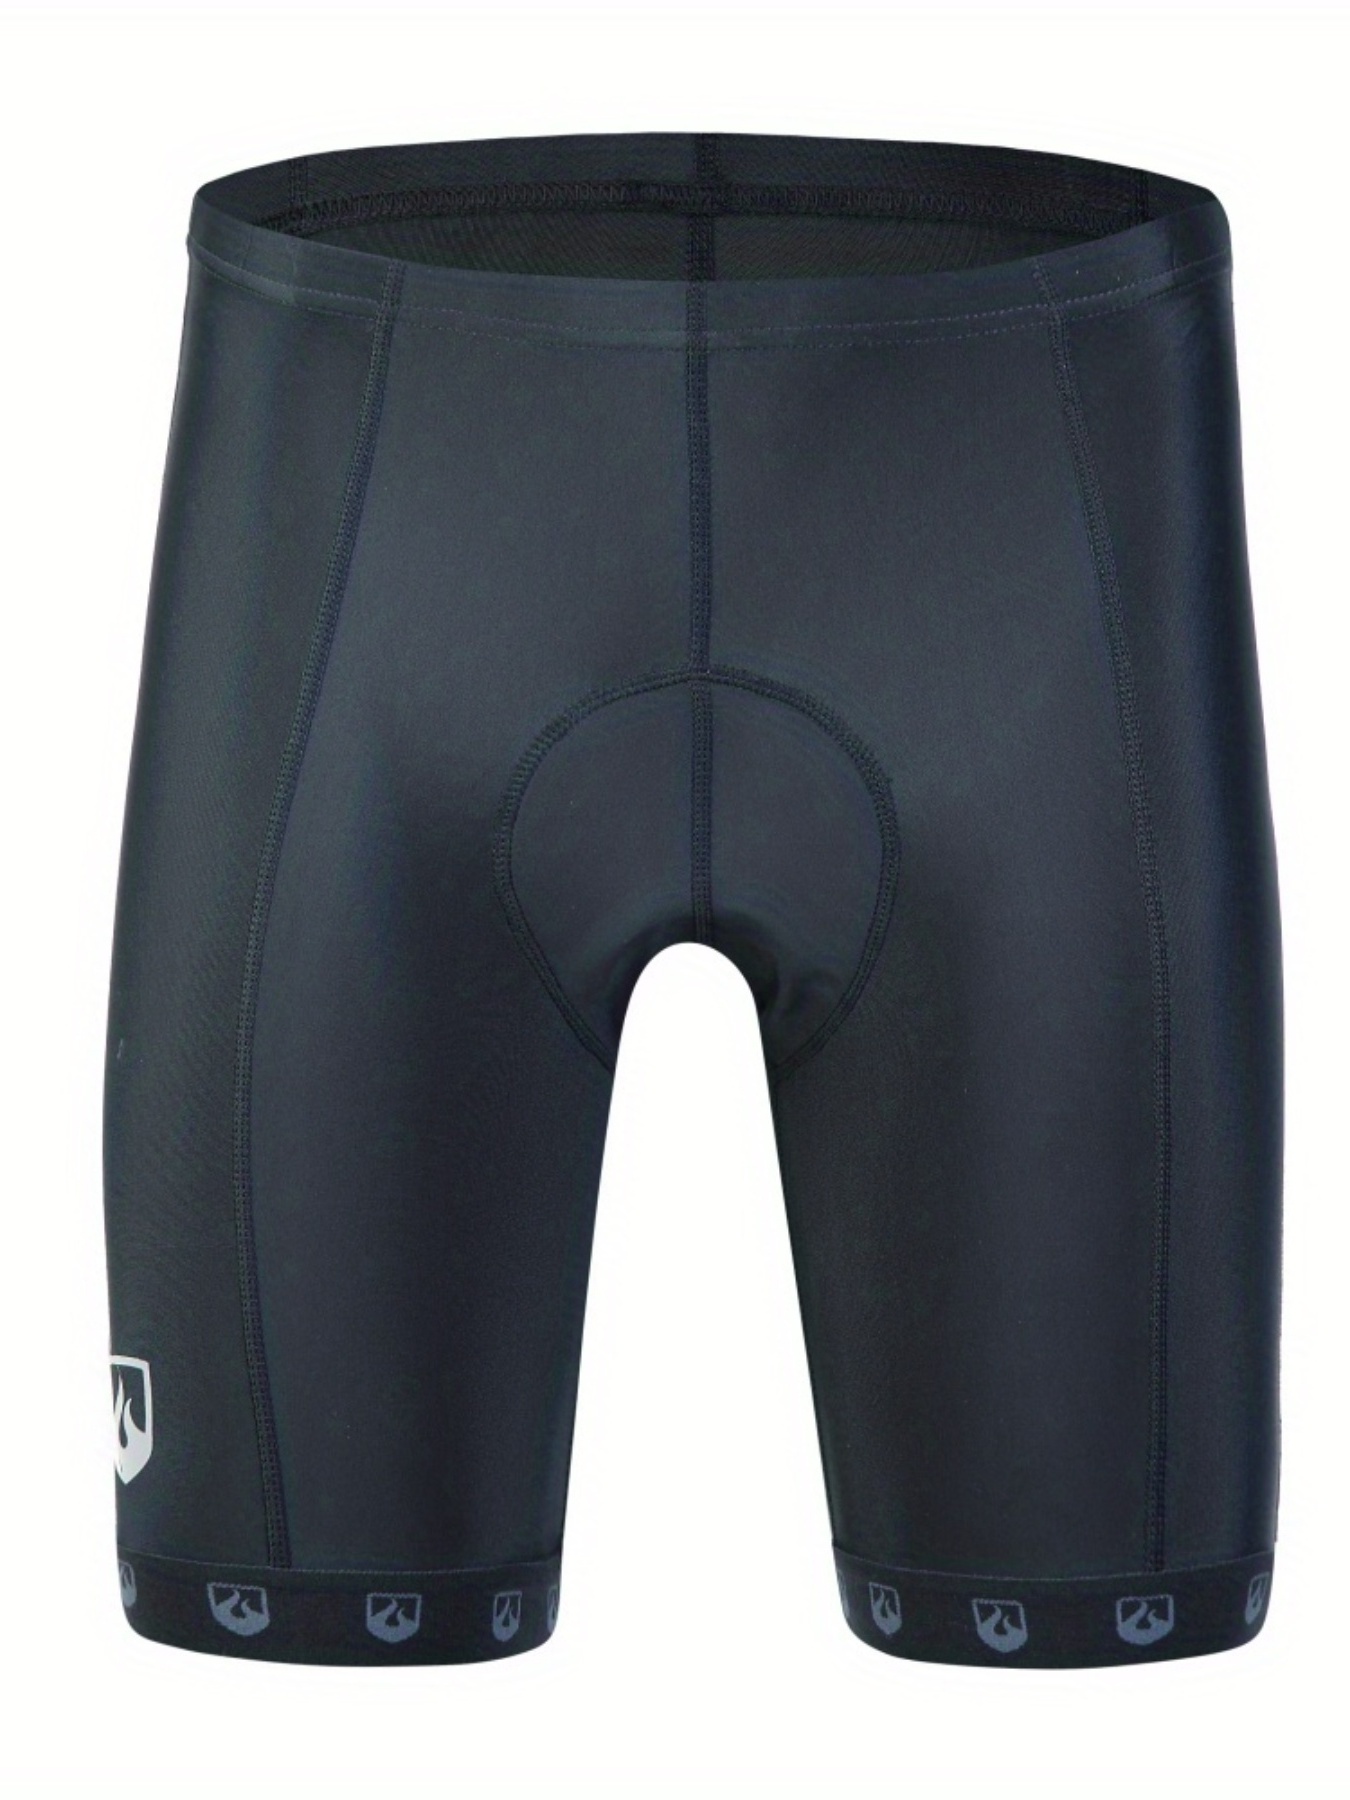 Compression Shorts Pads